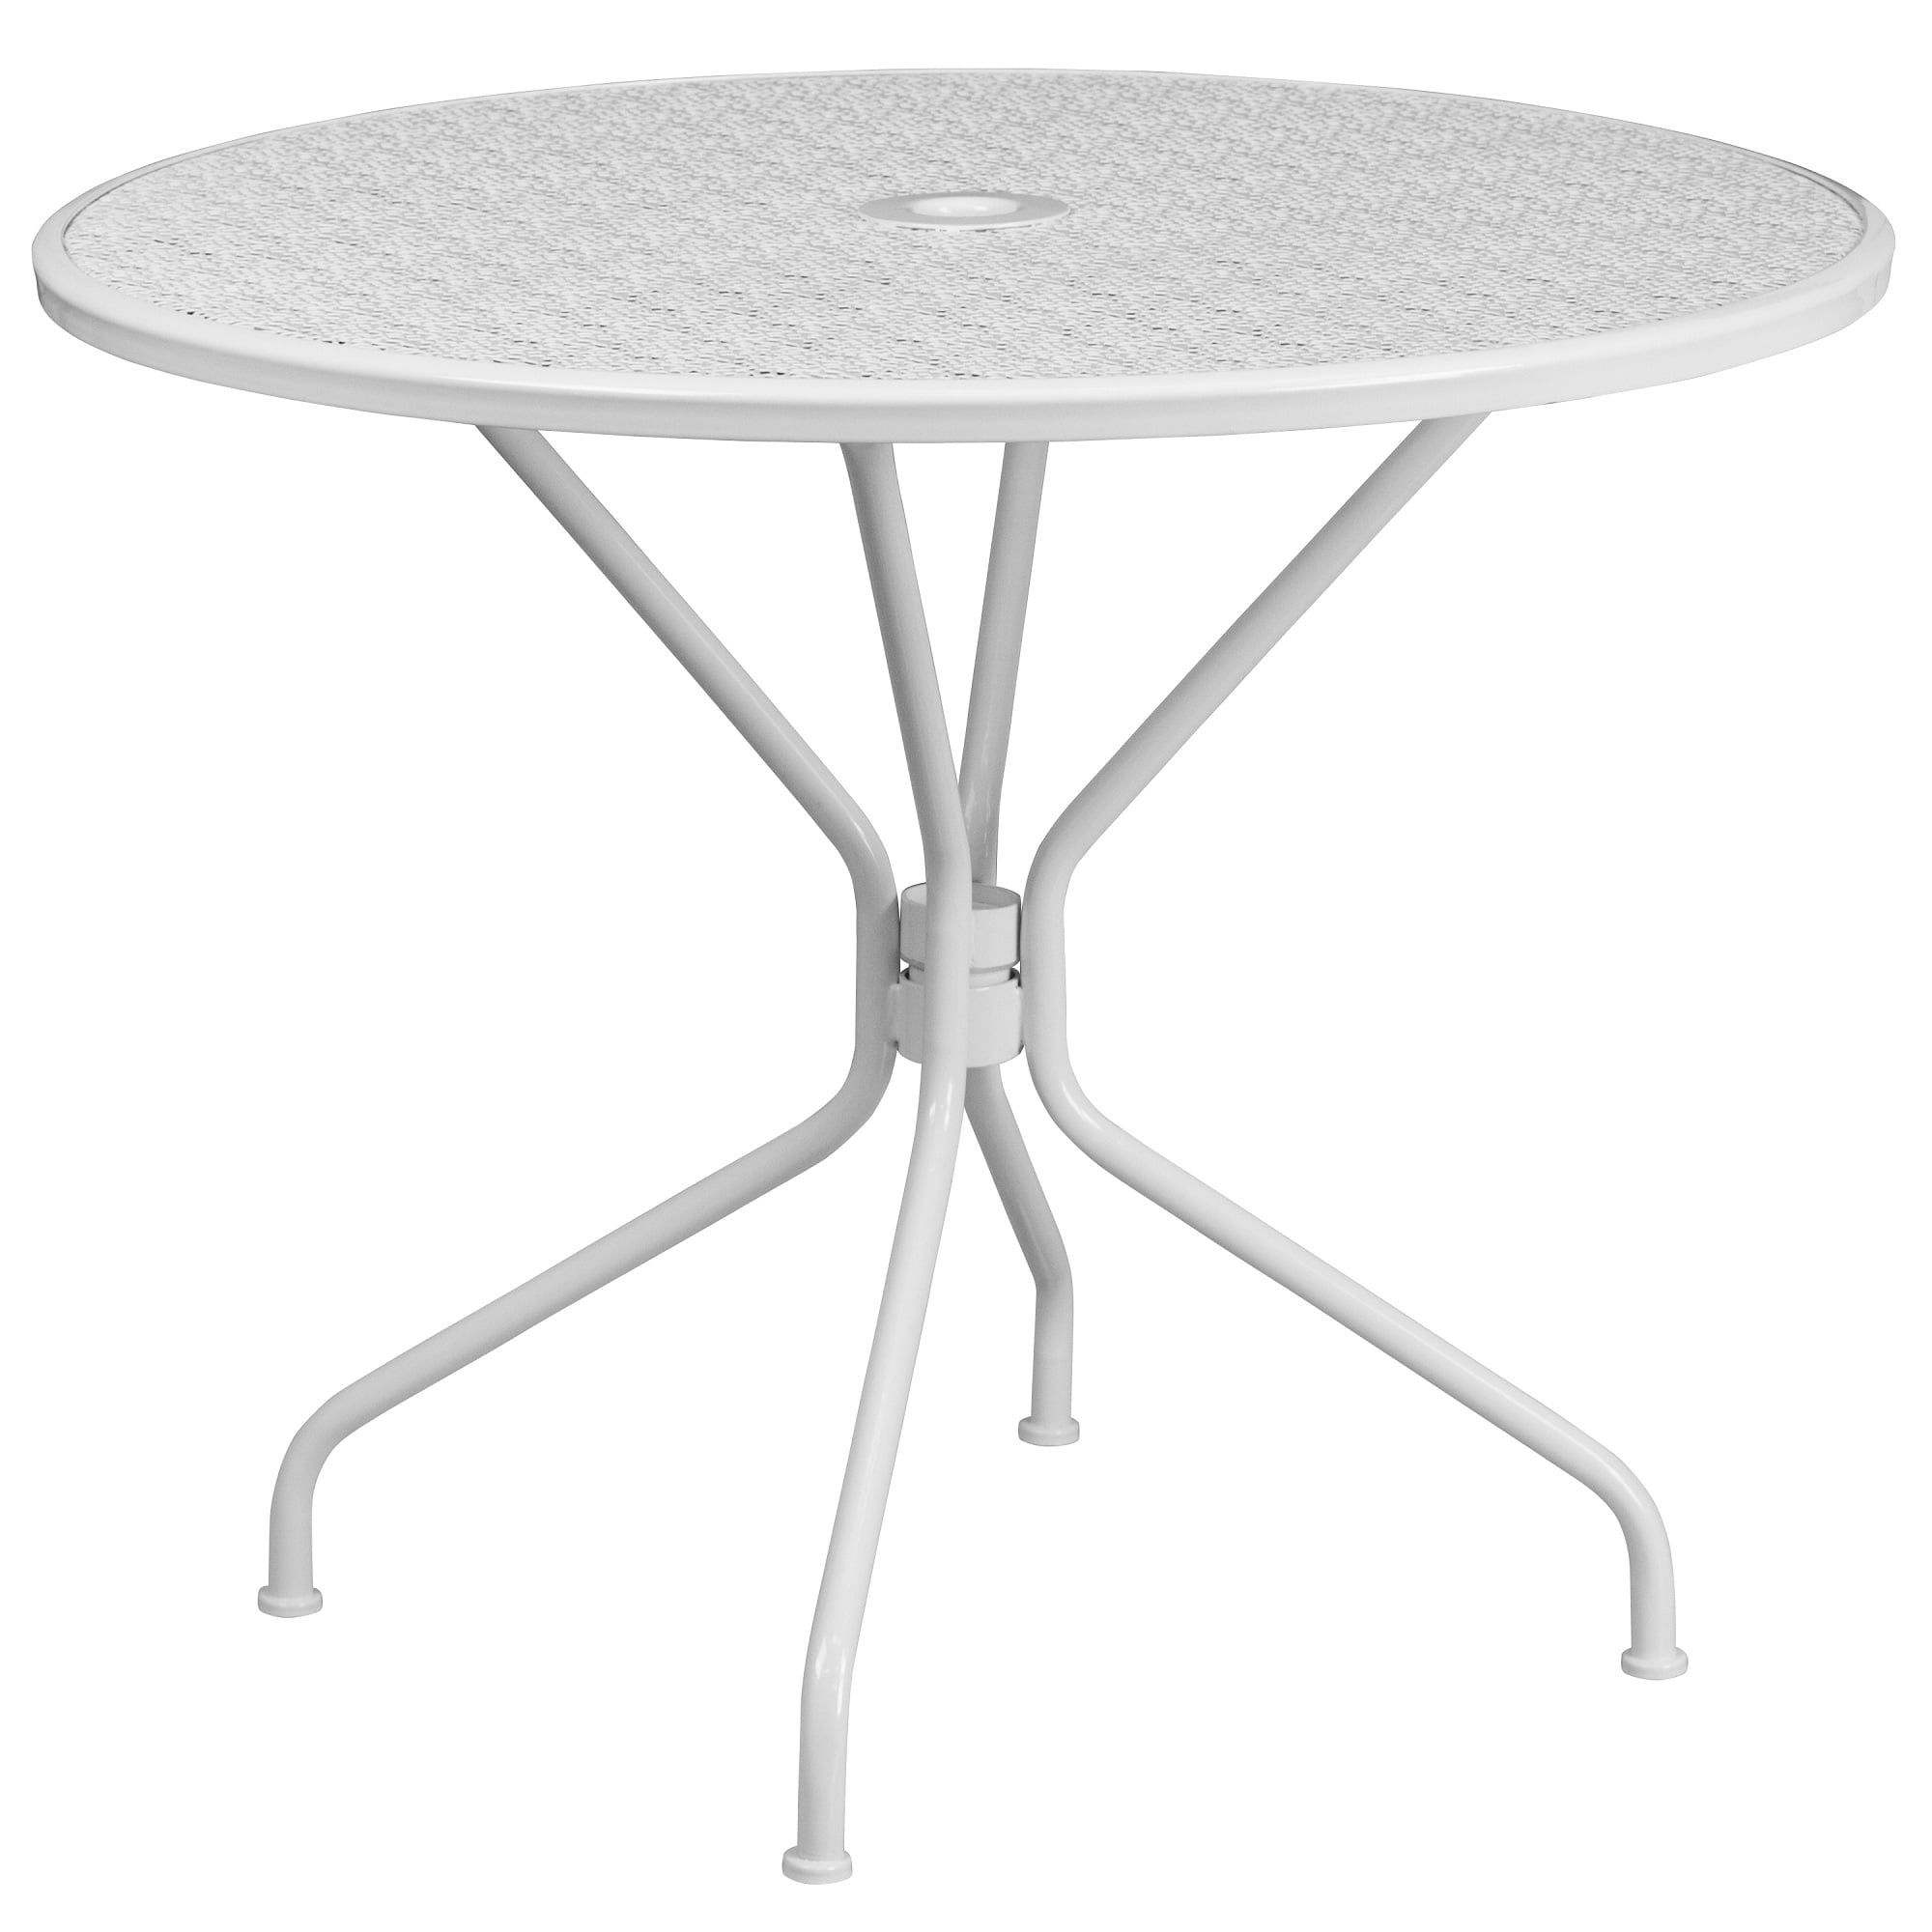 35 25 White Contemporary Round Outdoor, Round Patio Table For 6 With Umbrella Hole